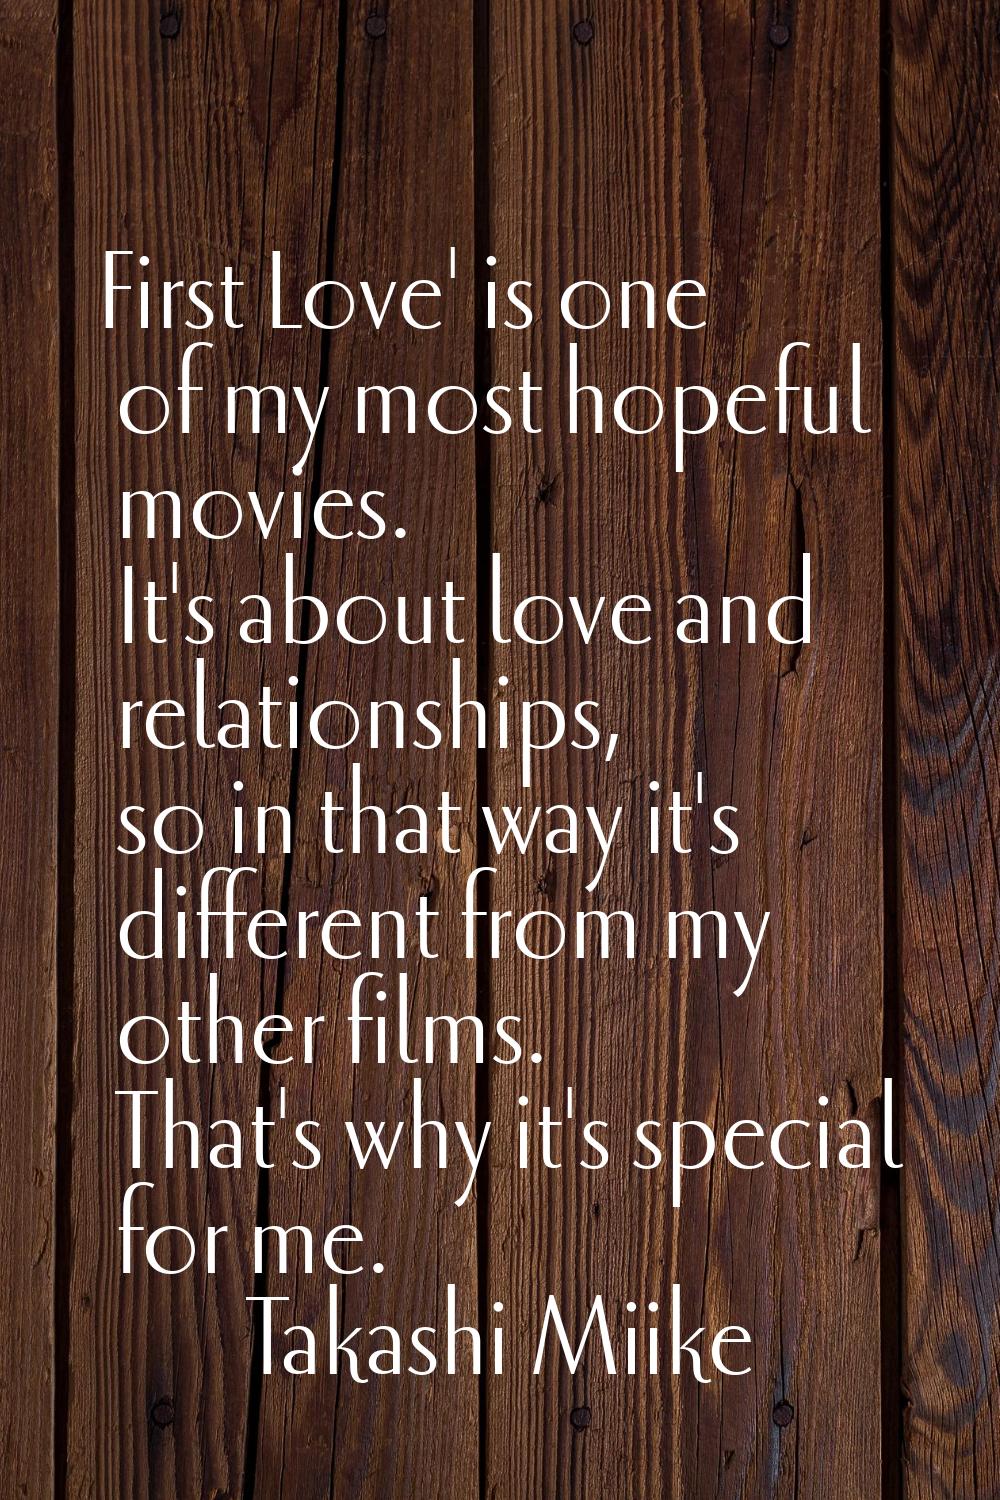 First Love' is one of my most hopeful movies. It's about love and relationships, so in that way it'